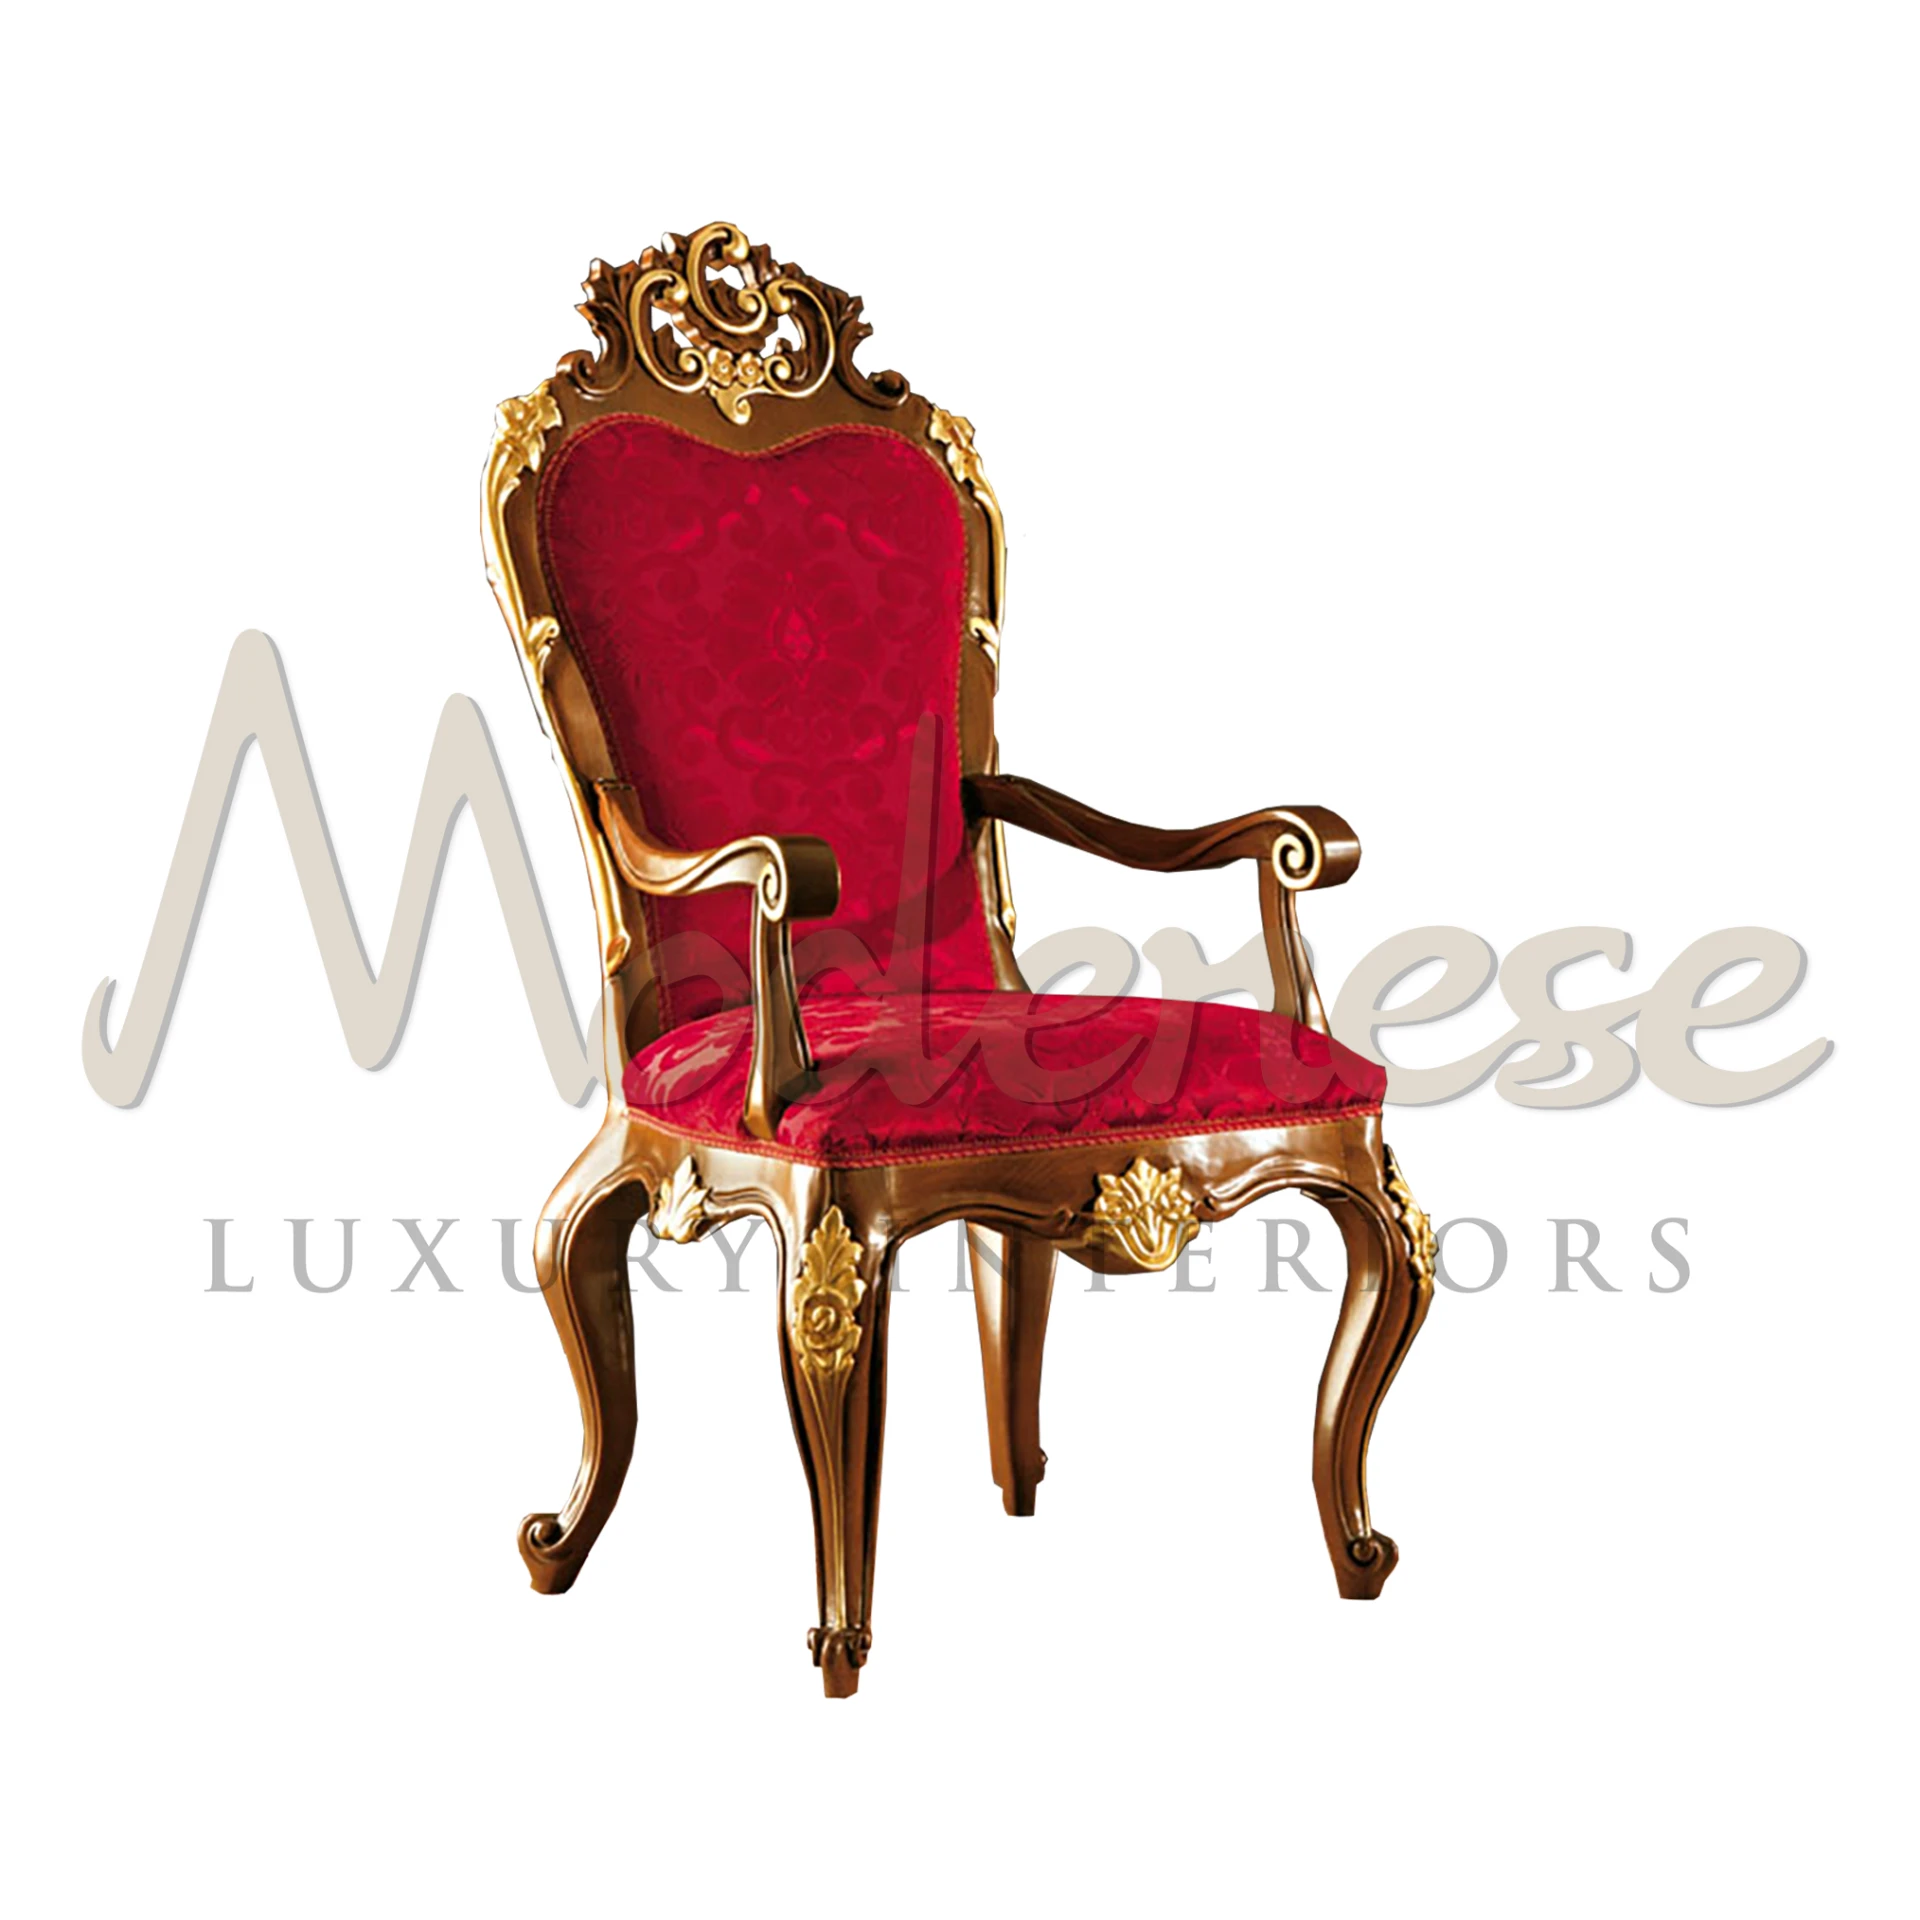 Make a statement with this flamboyant armchair featuring intricate upholstery, solid curved wood frame, and gold leaf carvings.